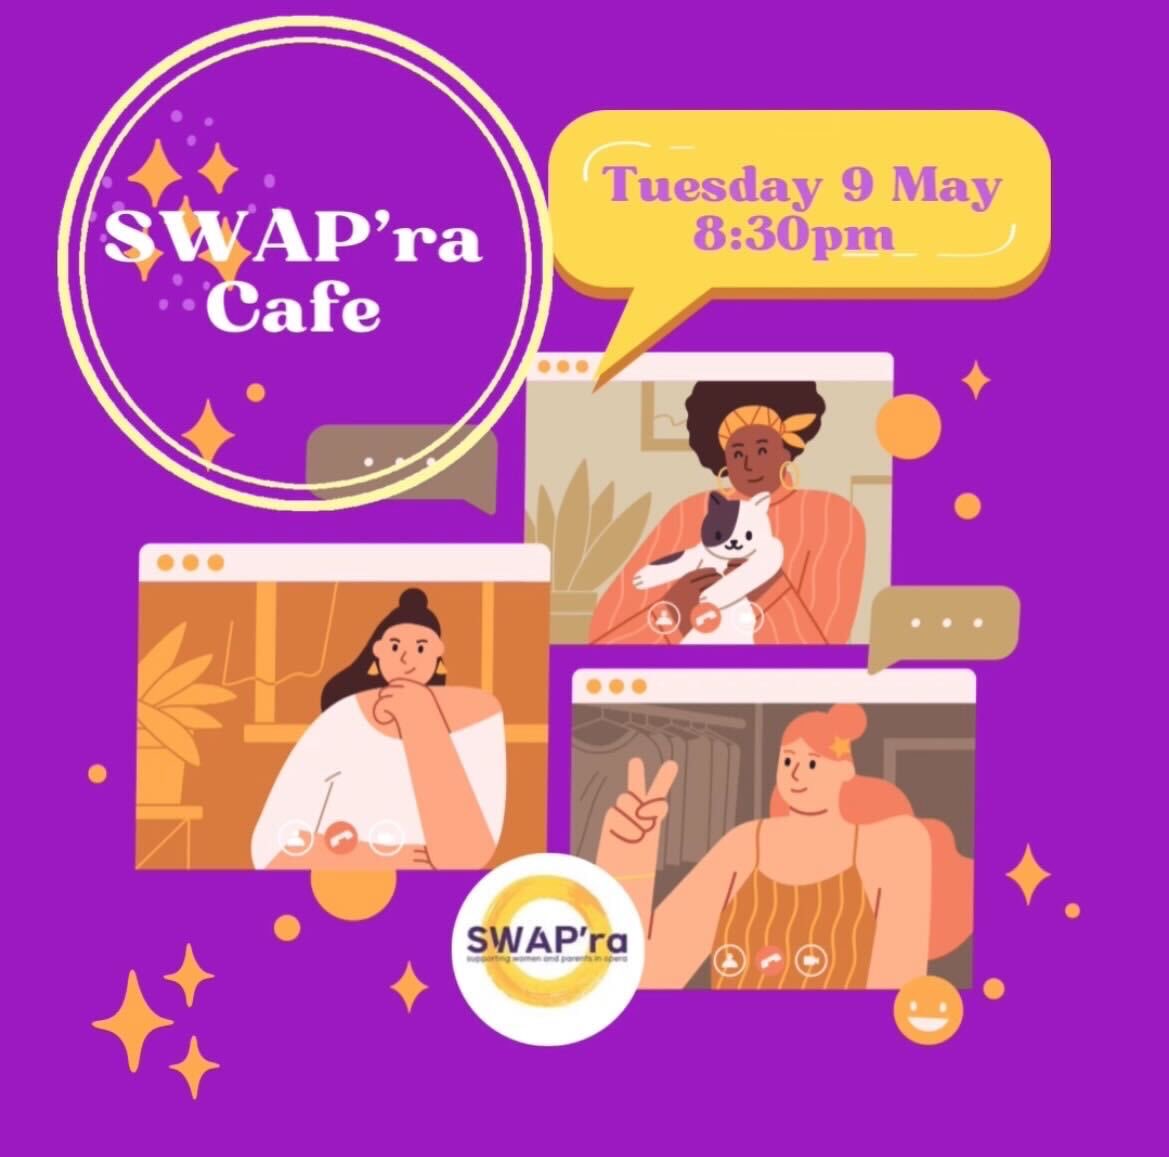 Are you looking to connect with other parents in the opera industry? Need some advice? Or fancy a chat with others who just ‘get it’…come to the SWAP’ra cafe, Tuesday 9th May @ 8:30pm. Sign up on our website for the zoom link 💻 swap-ra.org/cafe #parentsinperformance